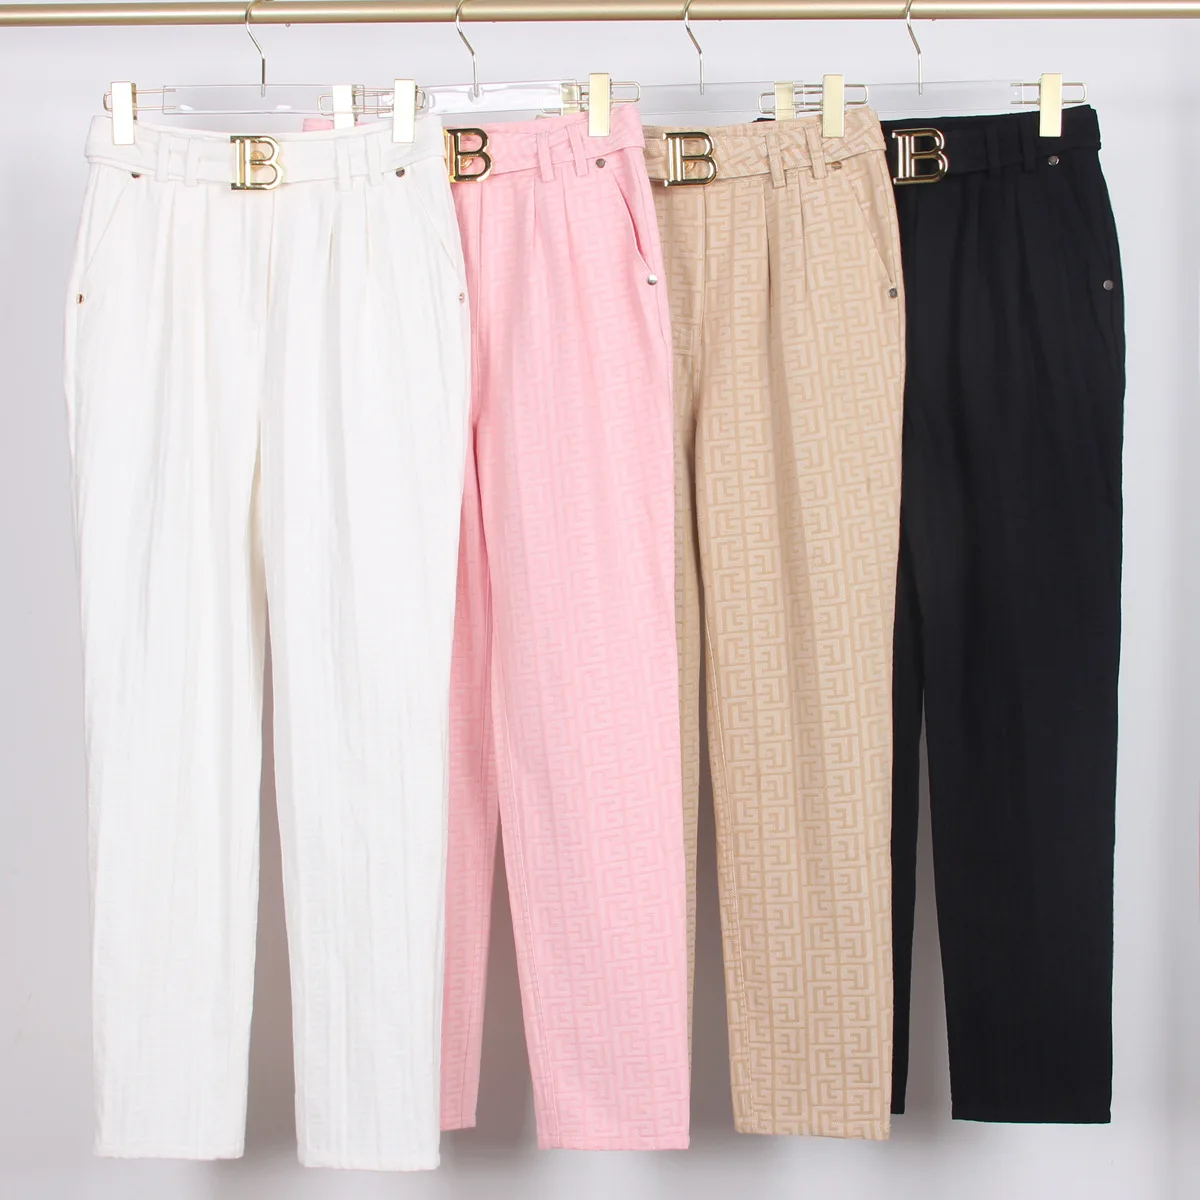 2022 Spring And Autumn New High-quality Jacquard Fabric Black And White Powder Khaki Casual High-end Casual Women's Pants